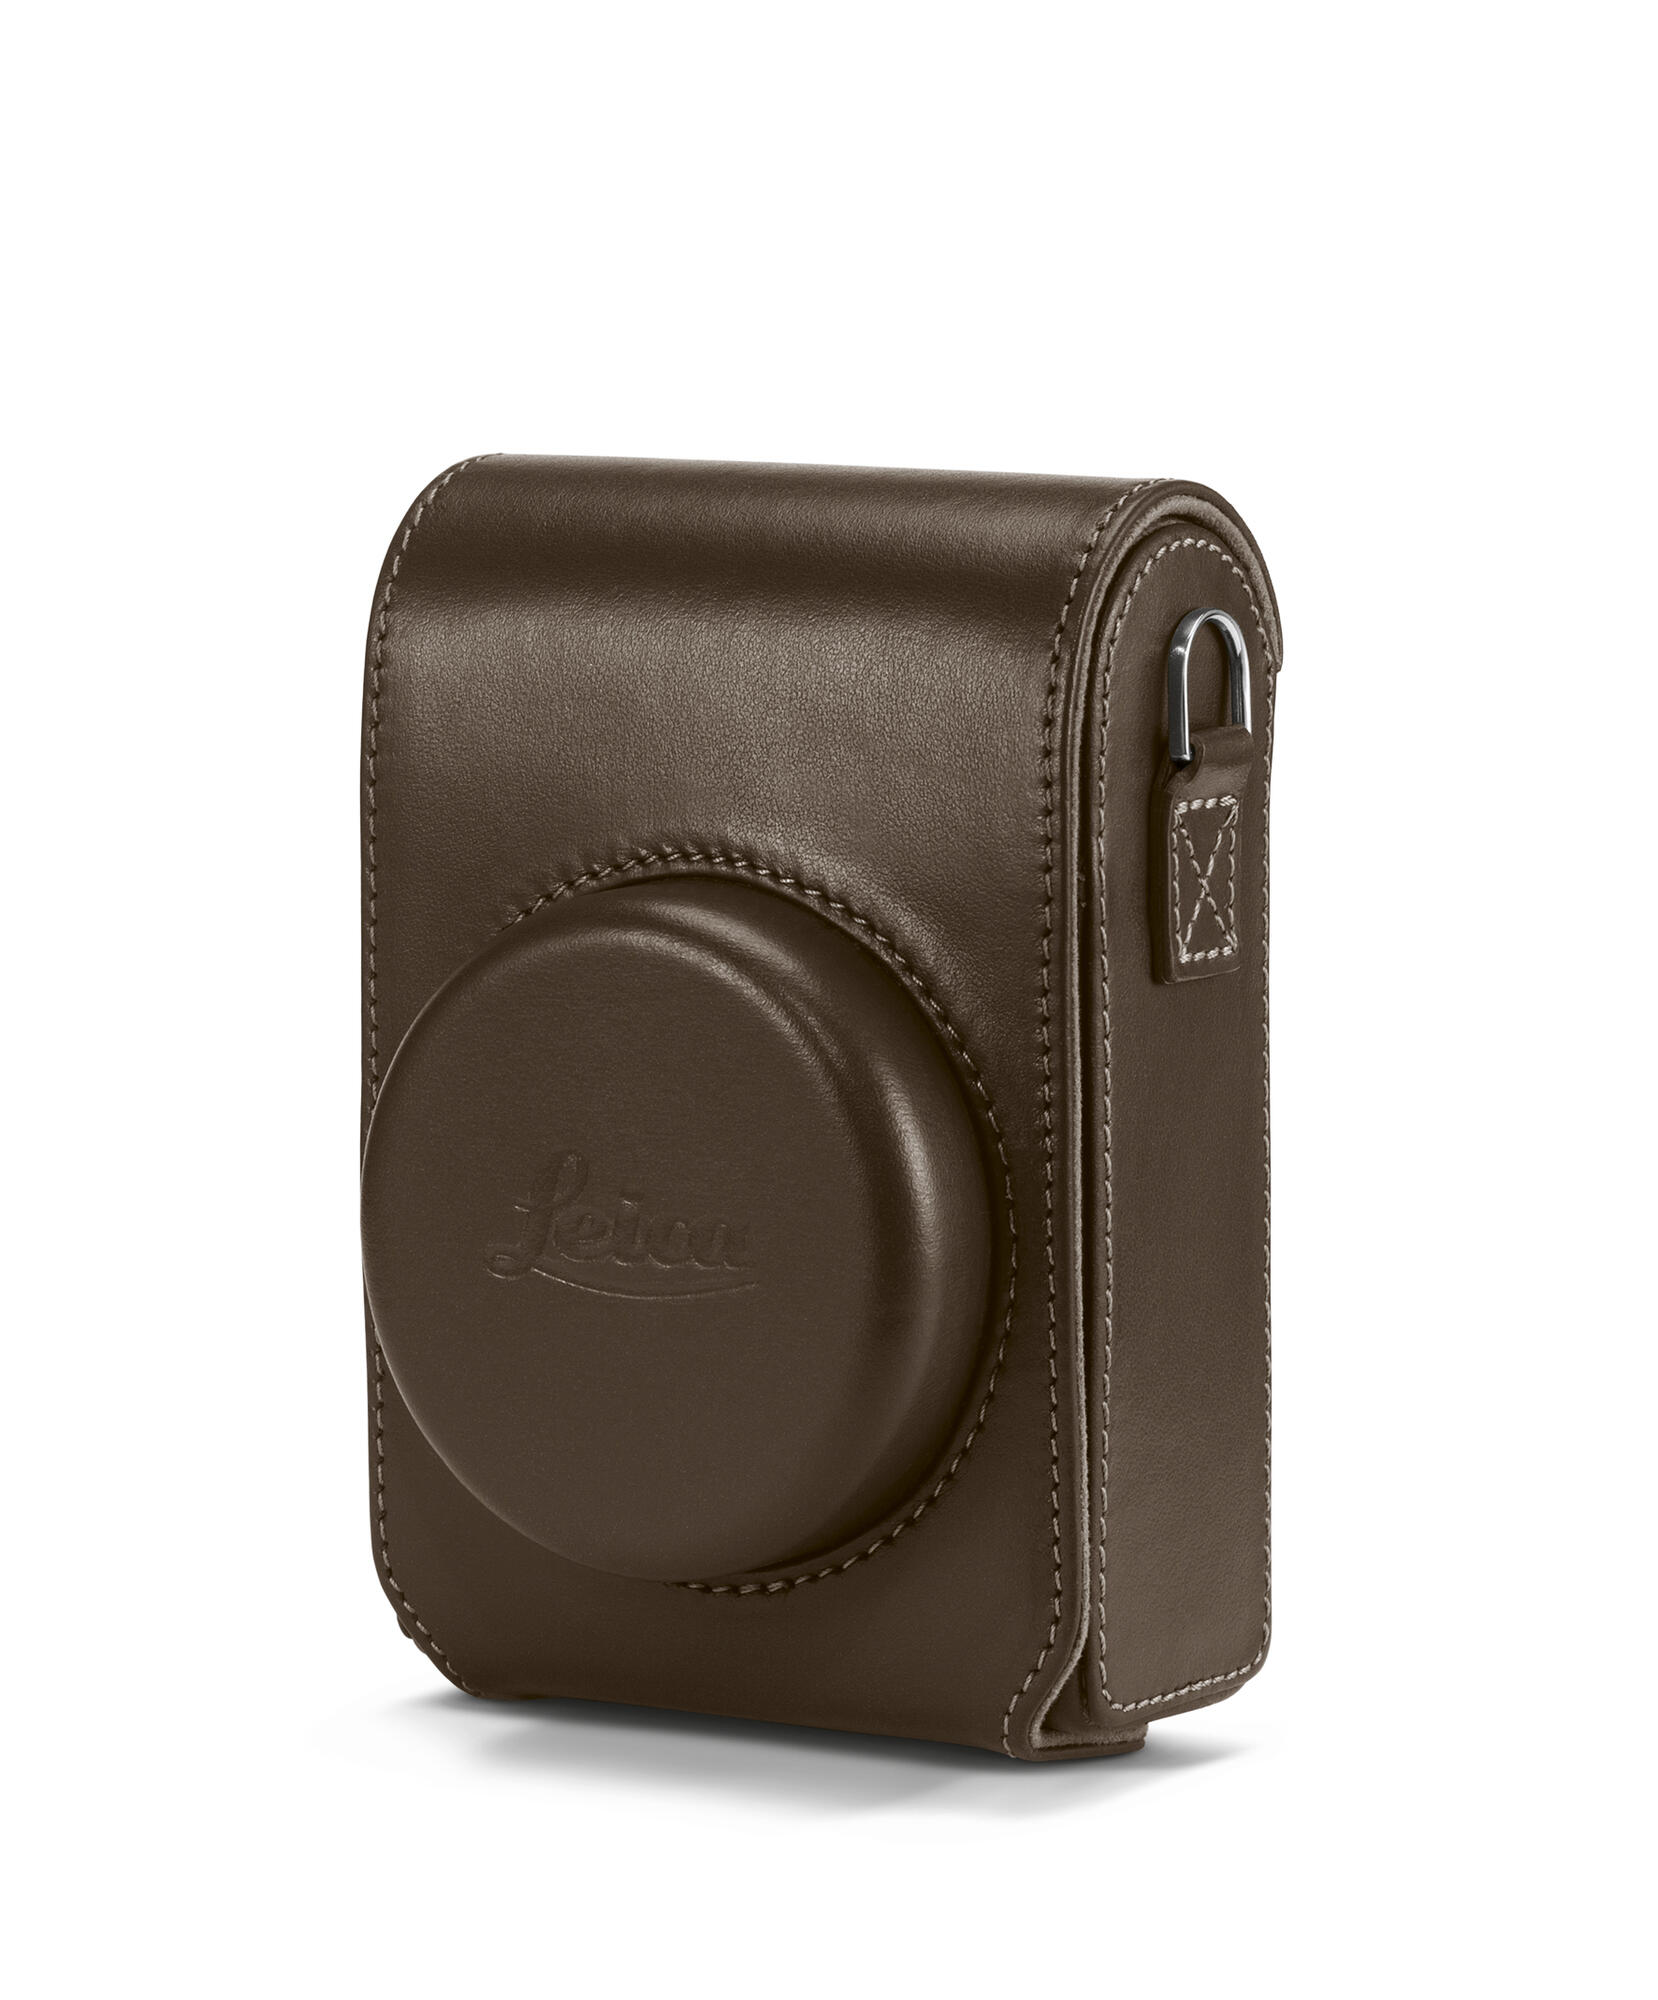 Case C-Lux, leather | Leica Camera AG